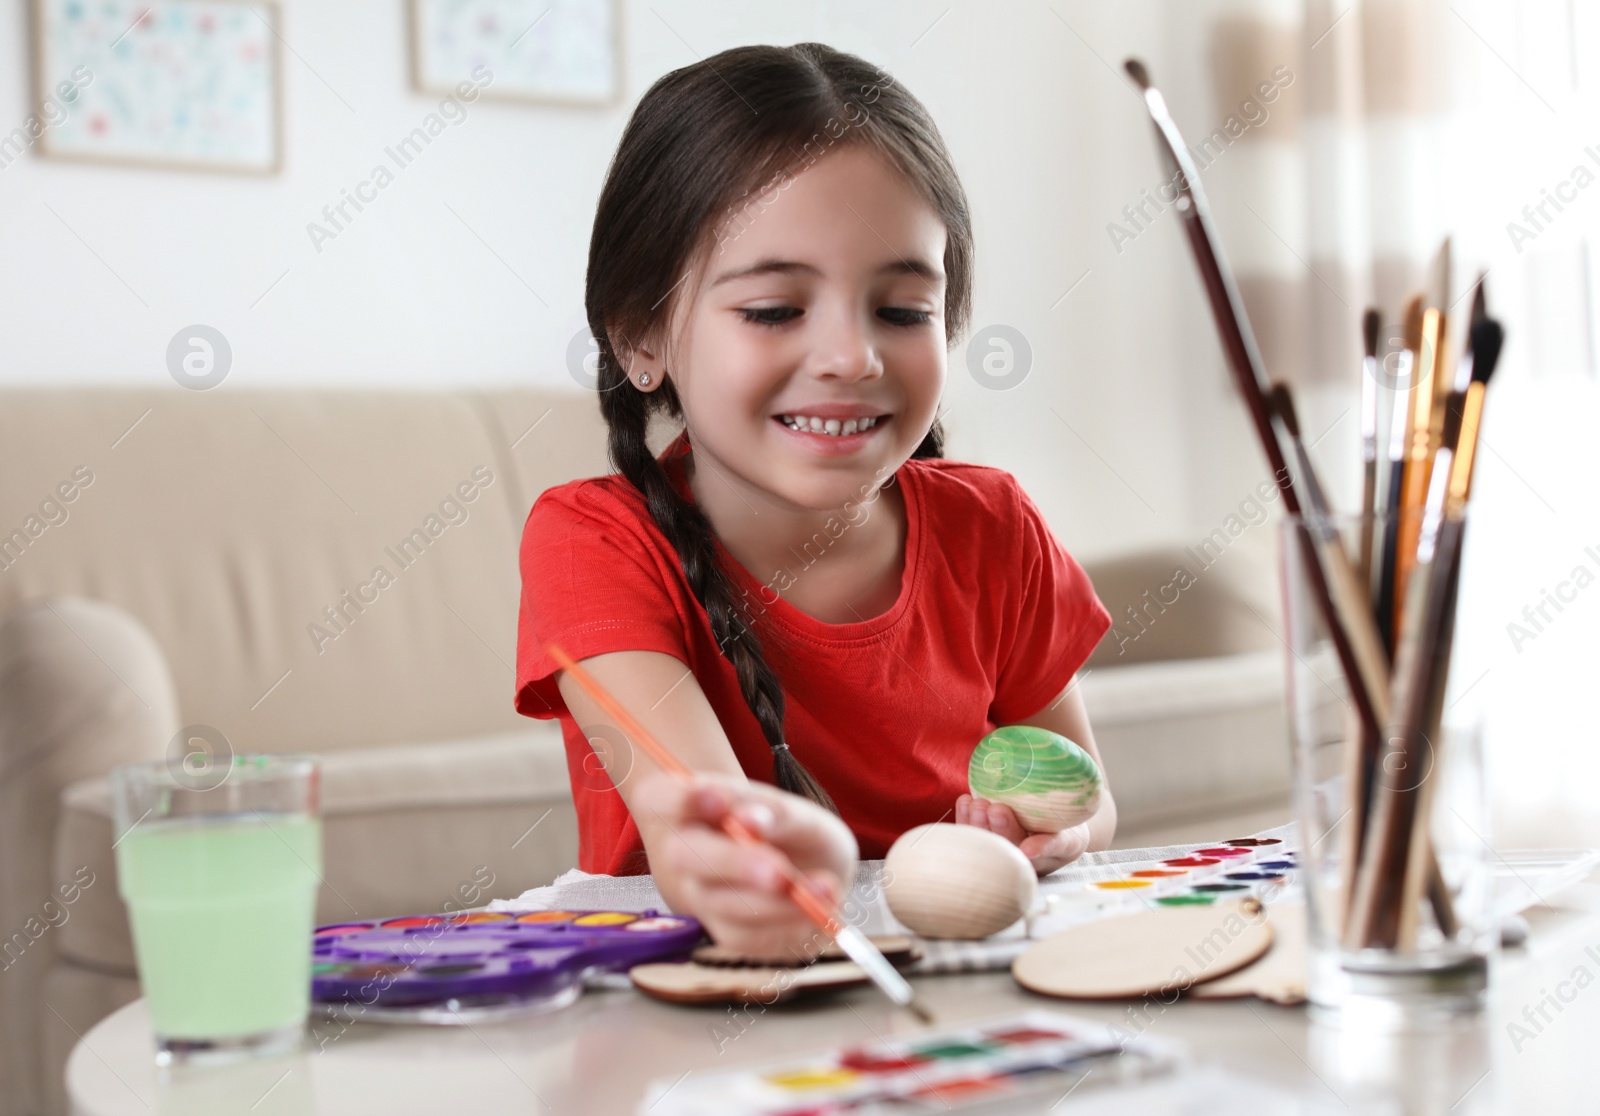 Photo of Little girl painting decorative egg at table indoors. Creative hobby